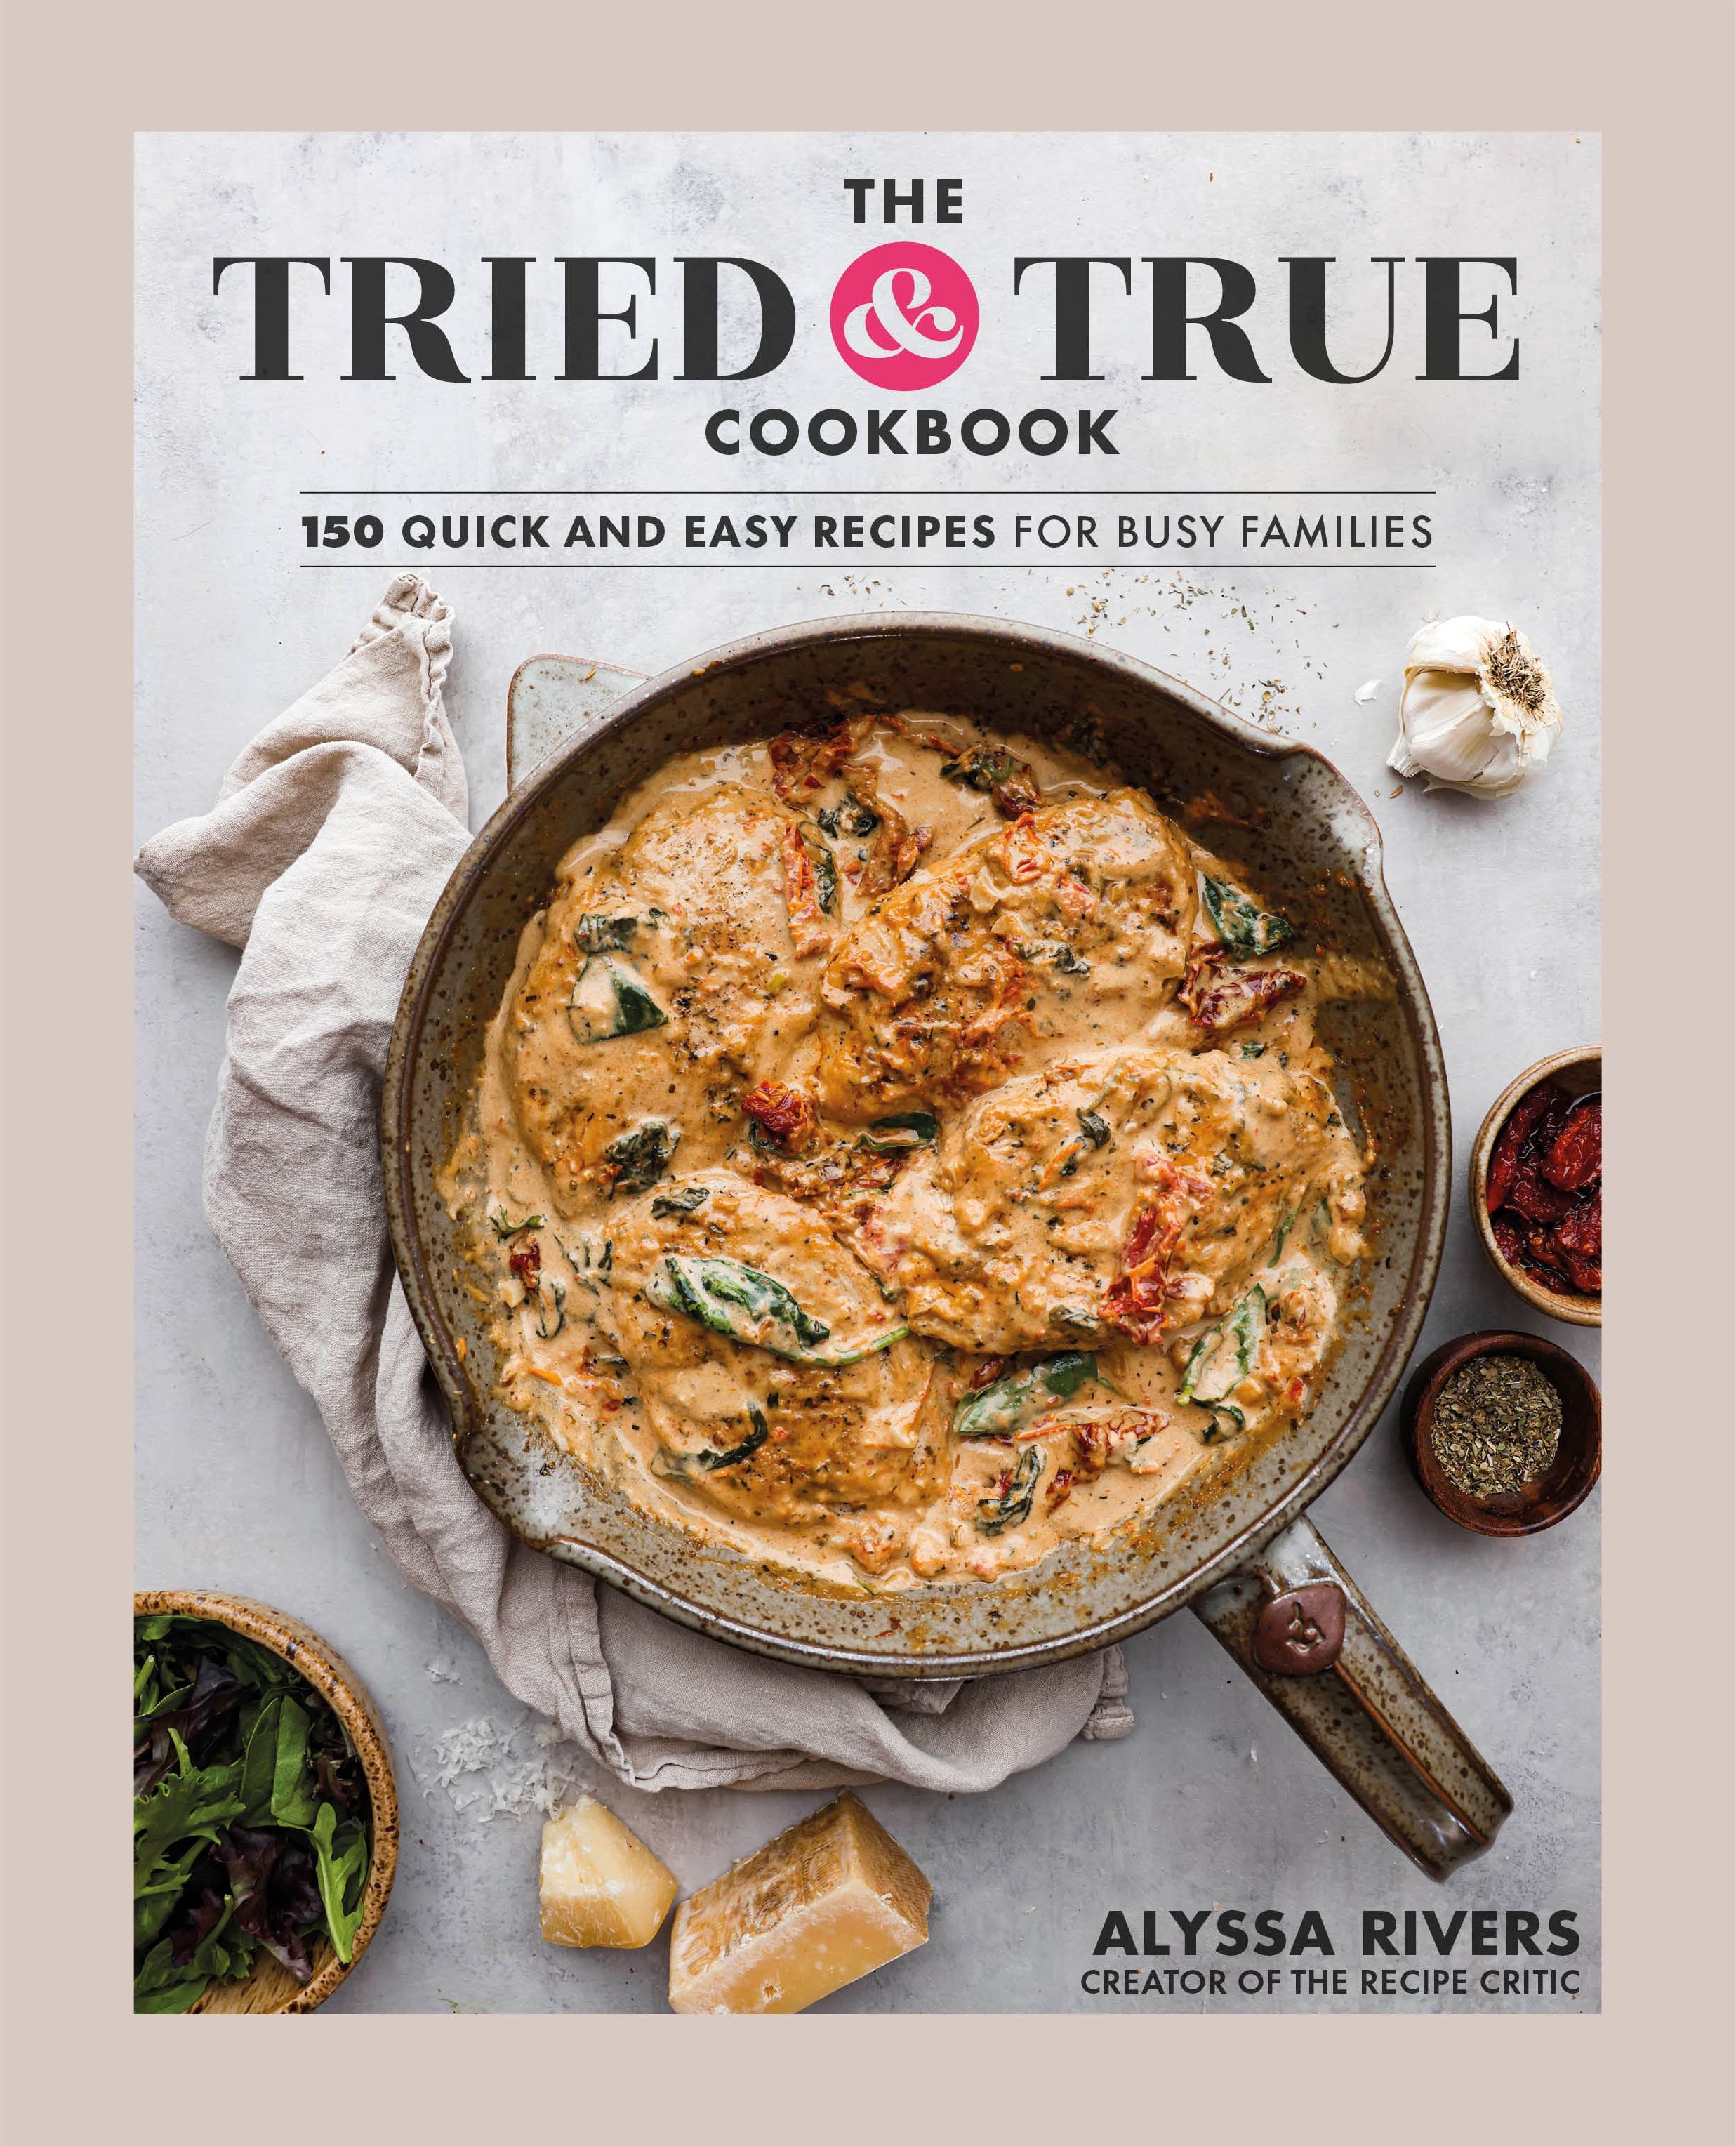 \u200bThe Tried & True Cookbook: 150 Quick and Easy Recipes for Busy Families